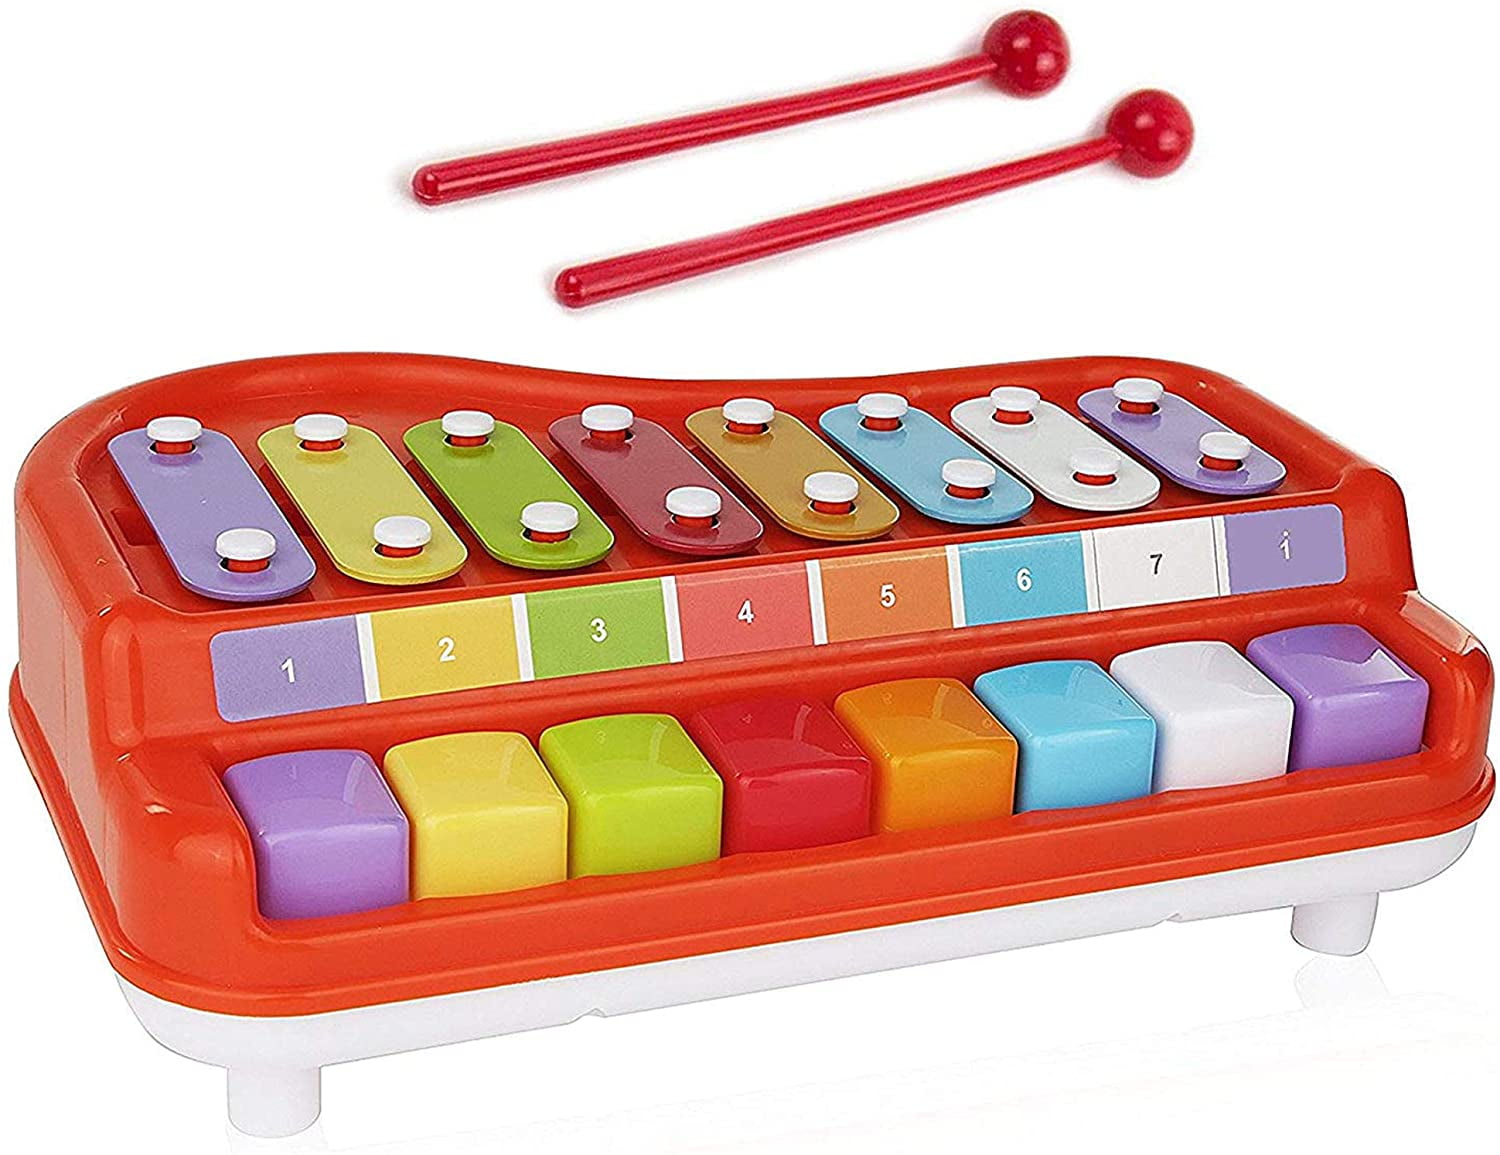 4 Note Xylophone Serinette Children Kids Learning Educational Music Musical Toys 